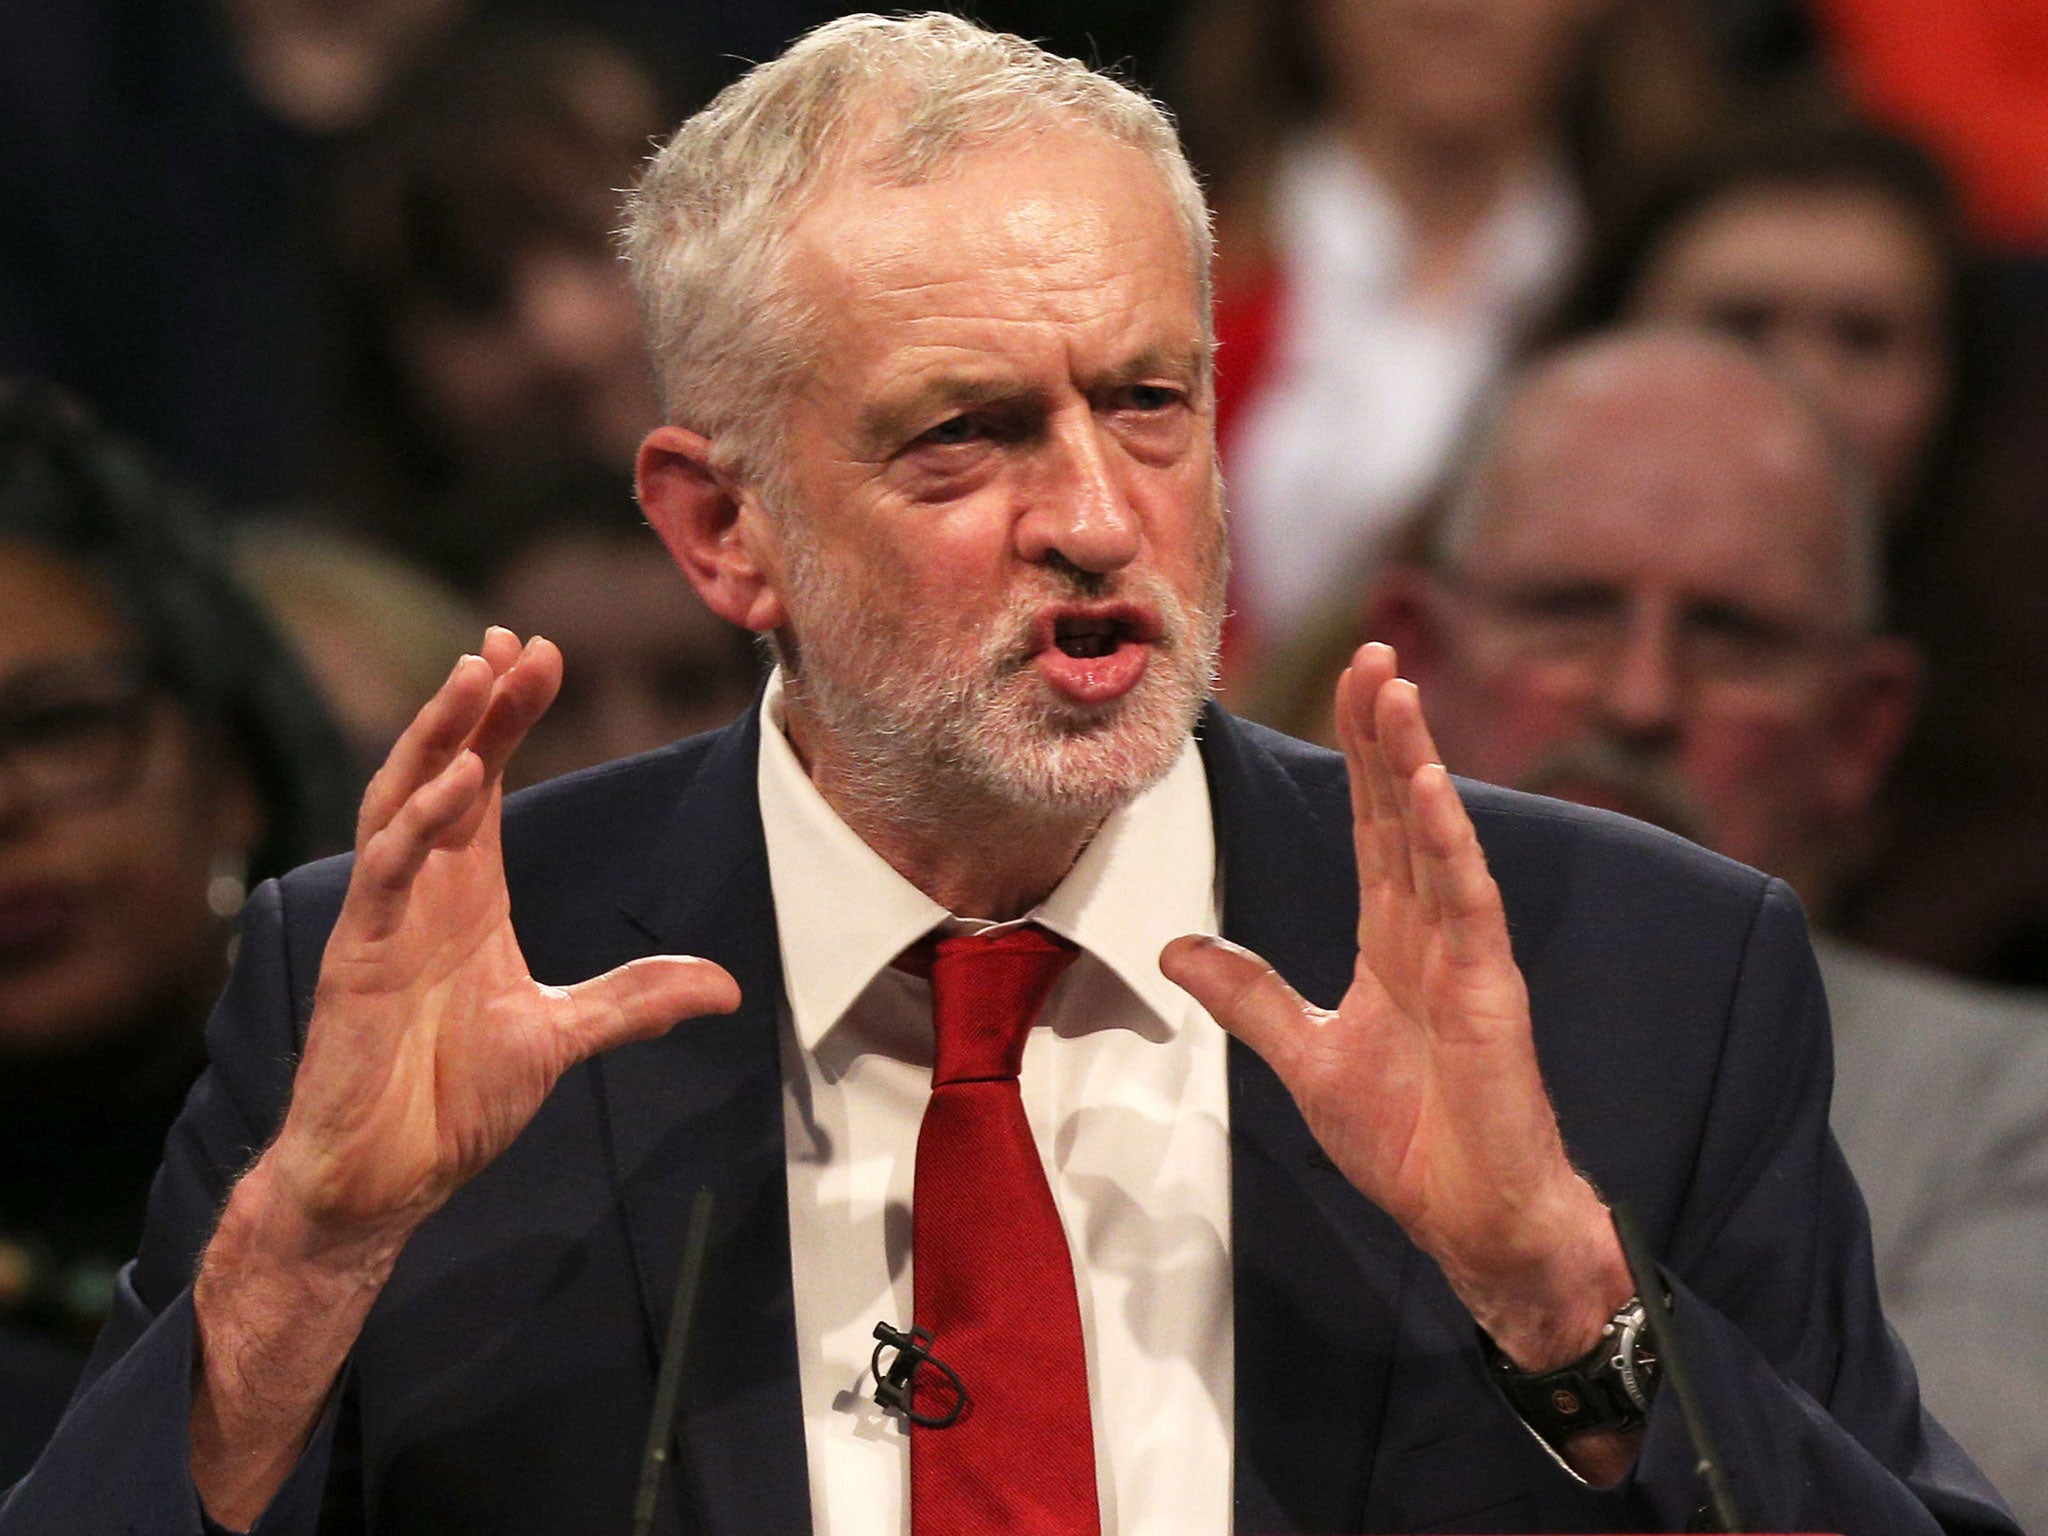 Jeremy Corbyn vows to strip City of London of its dominance in British economy